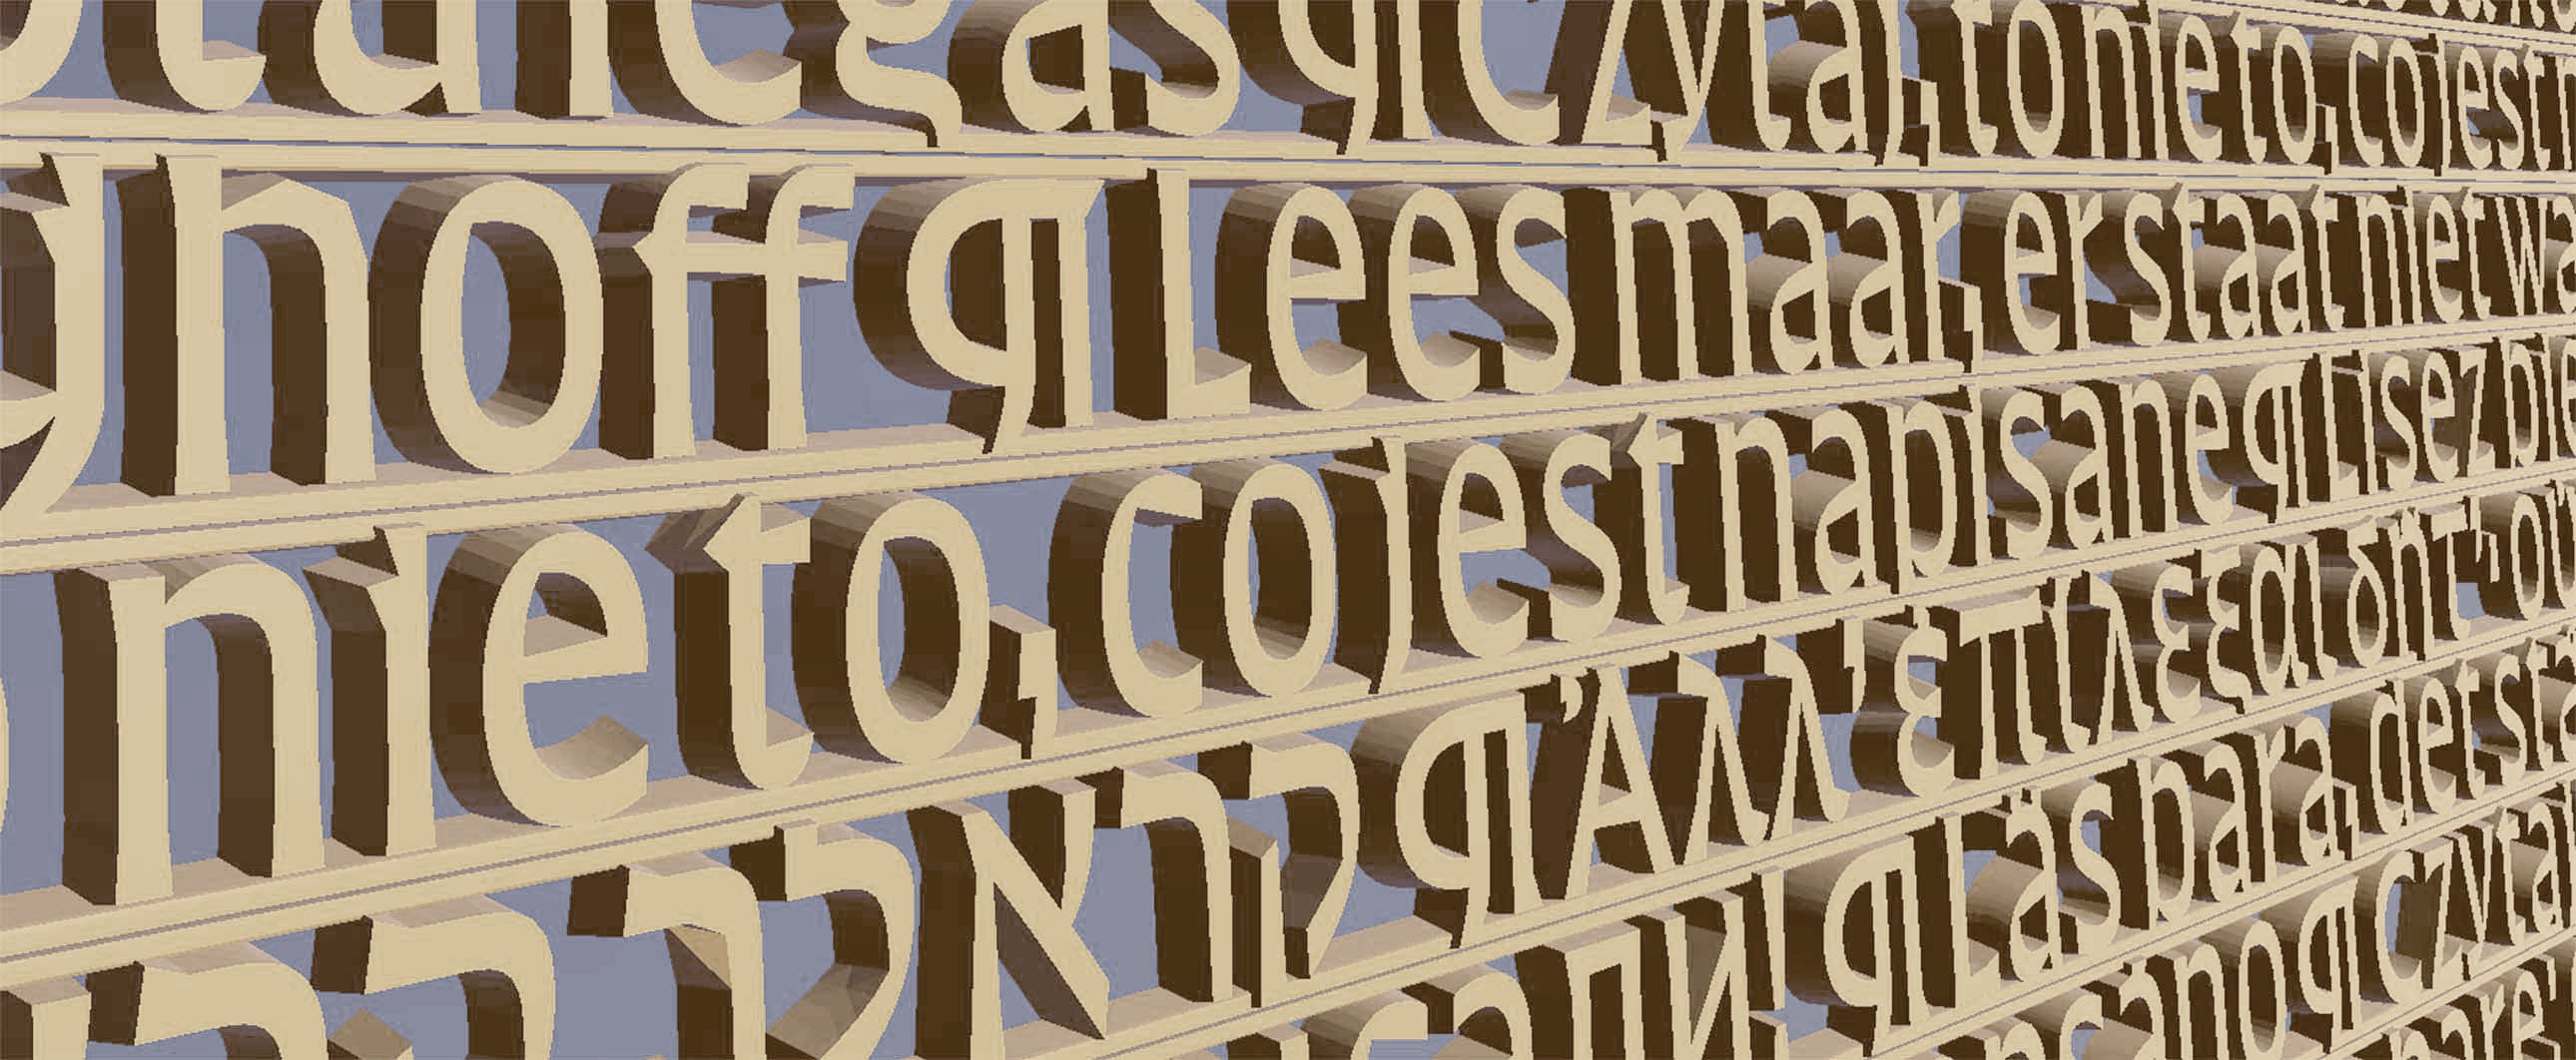 3d image of the lettershapes